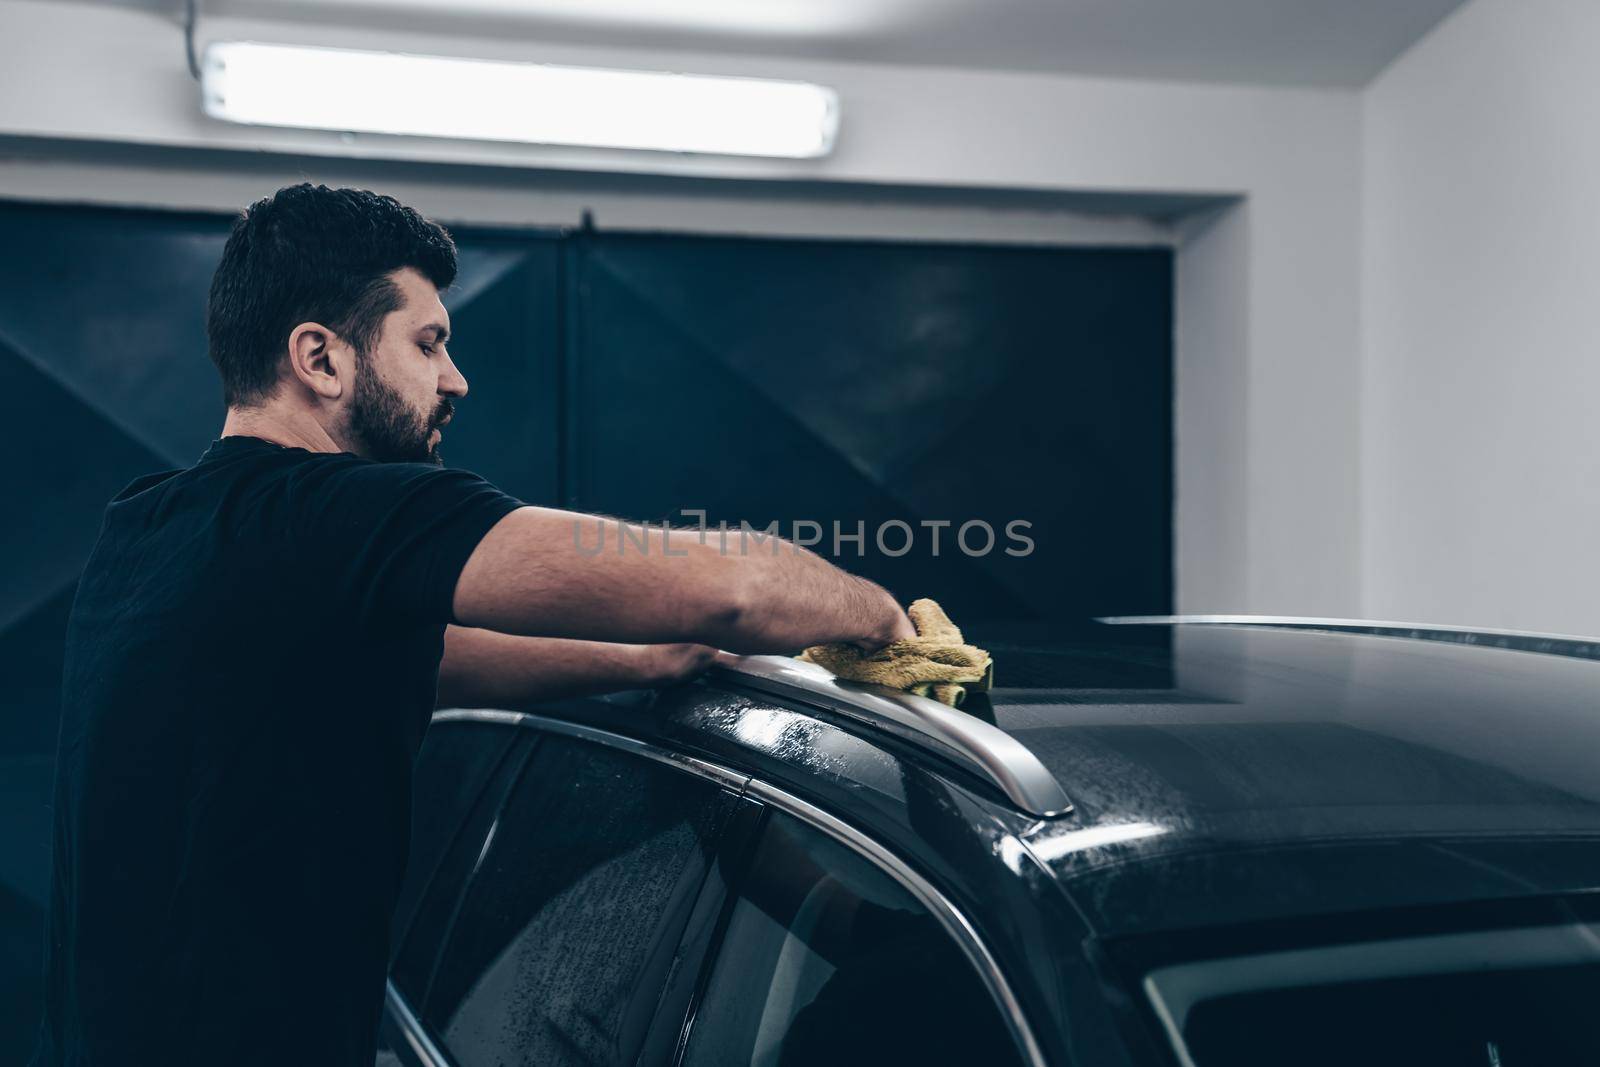 man cleans the car body with a towel. auto care by Edophoto